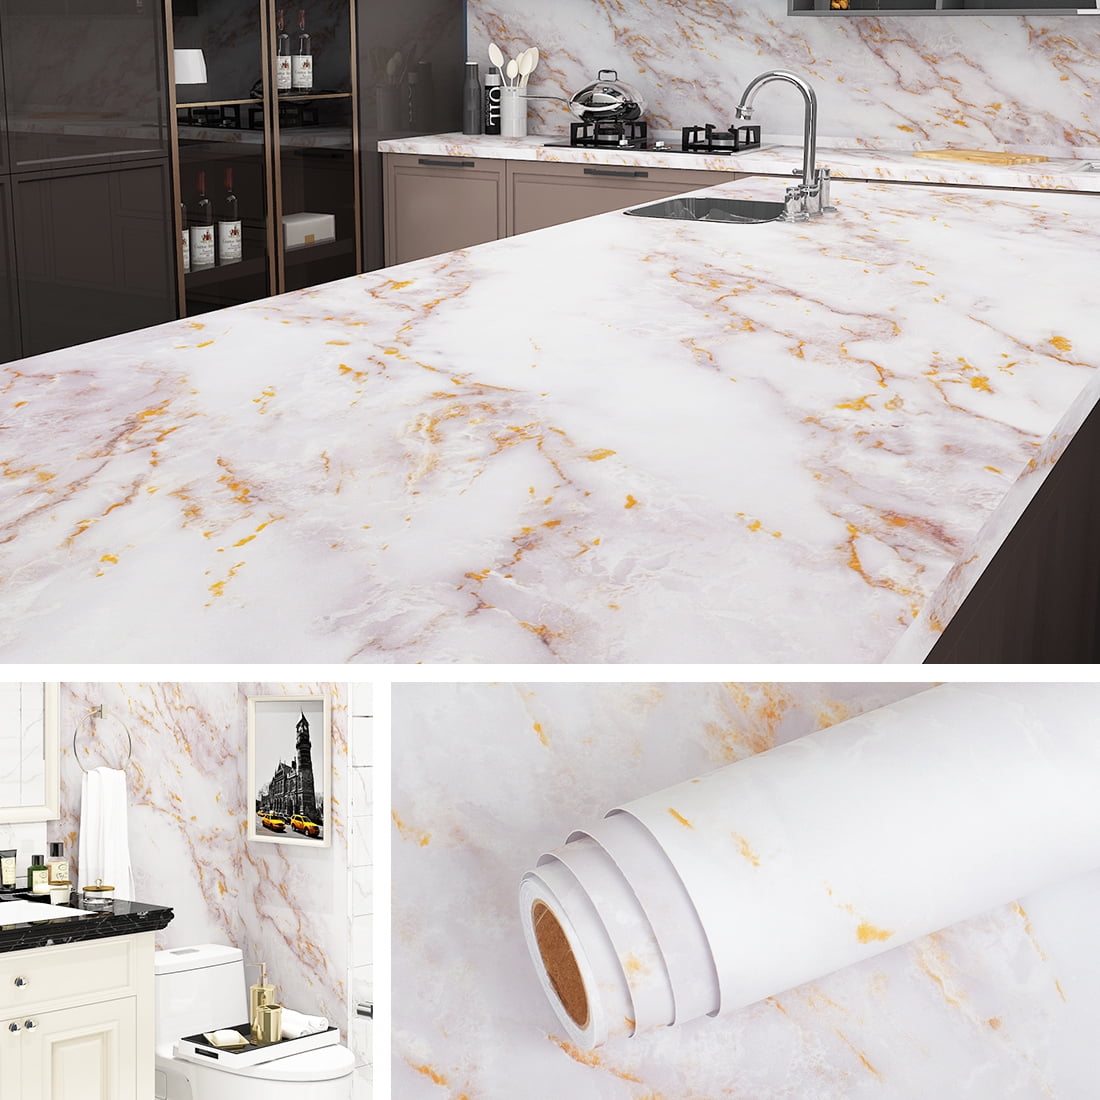 Livelynine 197"×24" Wide Marble Contact Paper White Gold Marble Countertop Adhesive Wallpaper Peel Countertop Kitchen Table Counter Bathroom Waterproof - Walmart.com